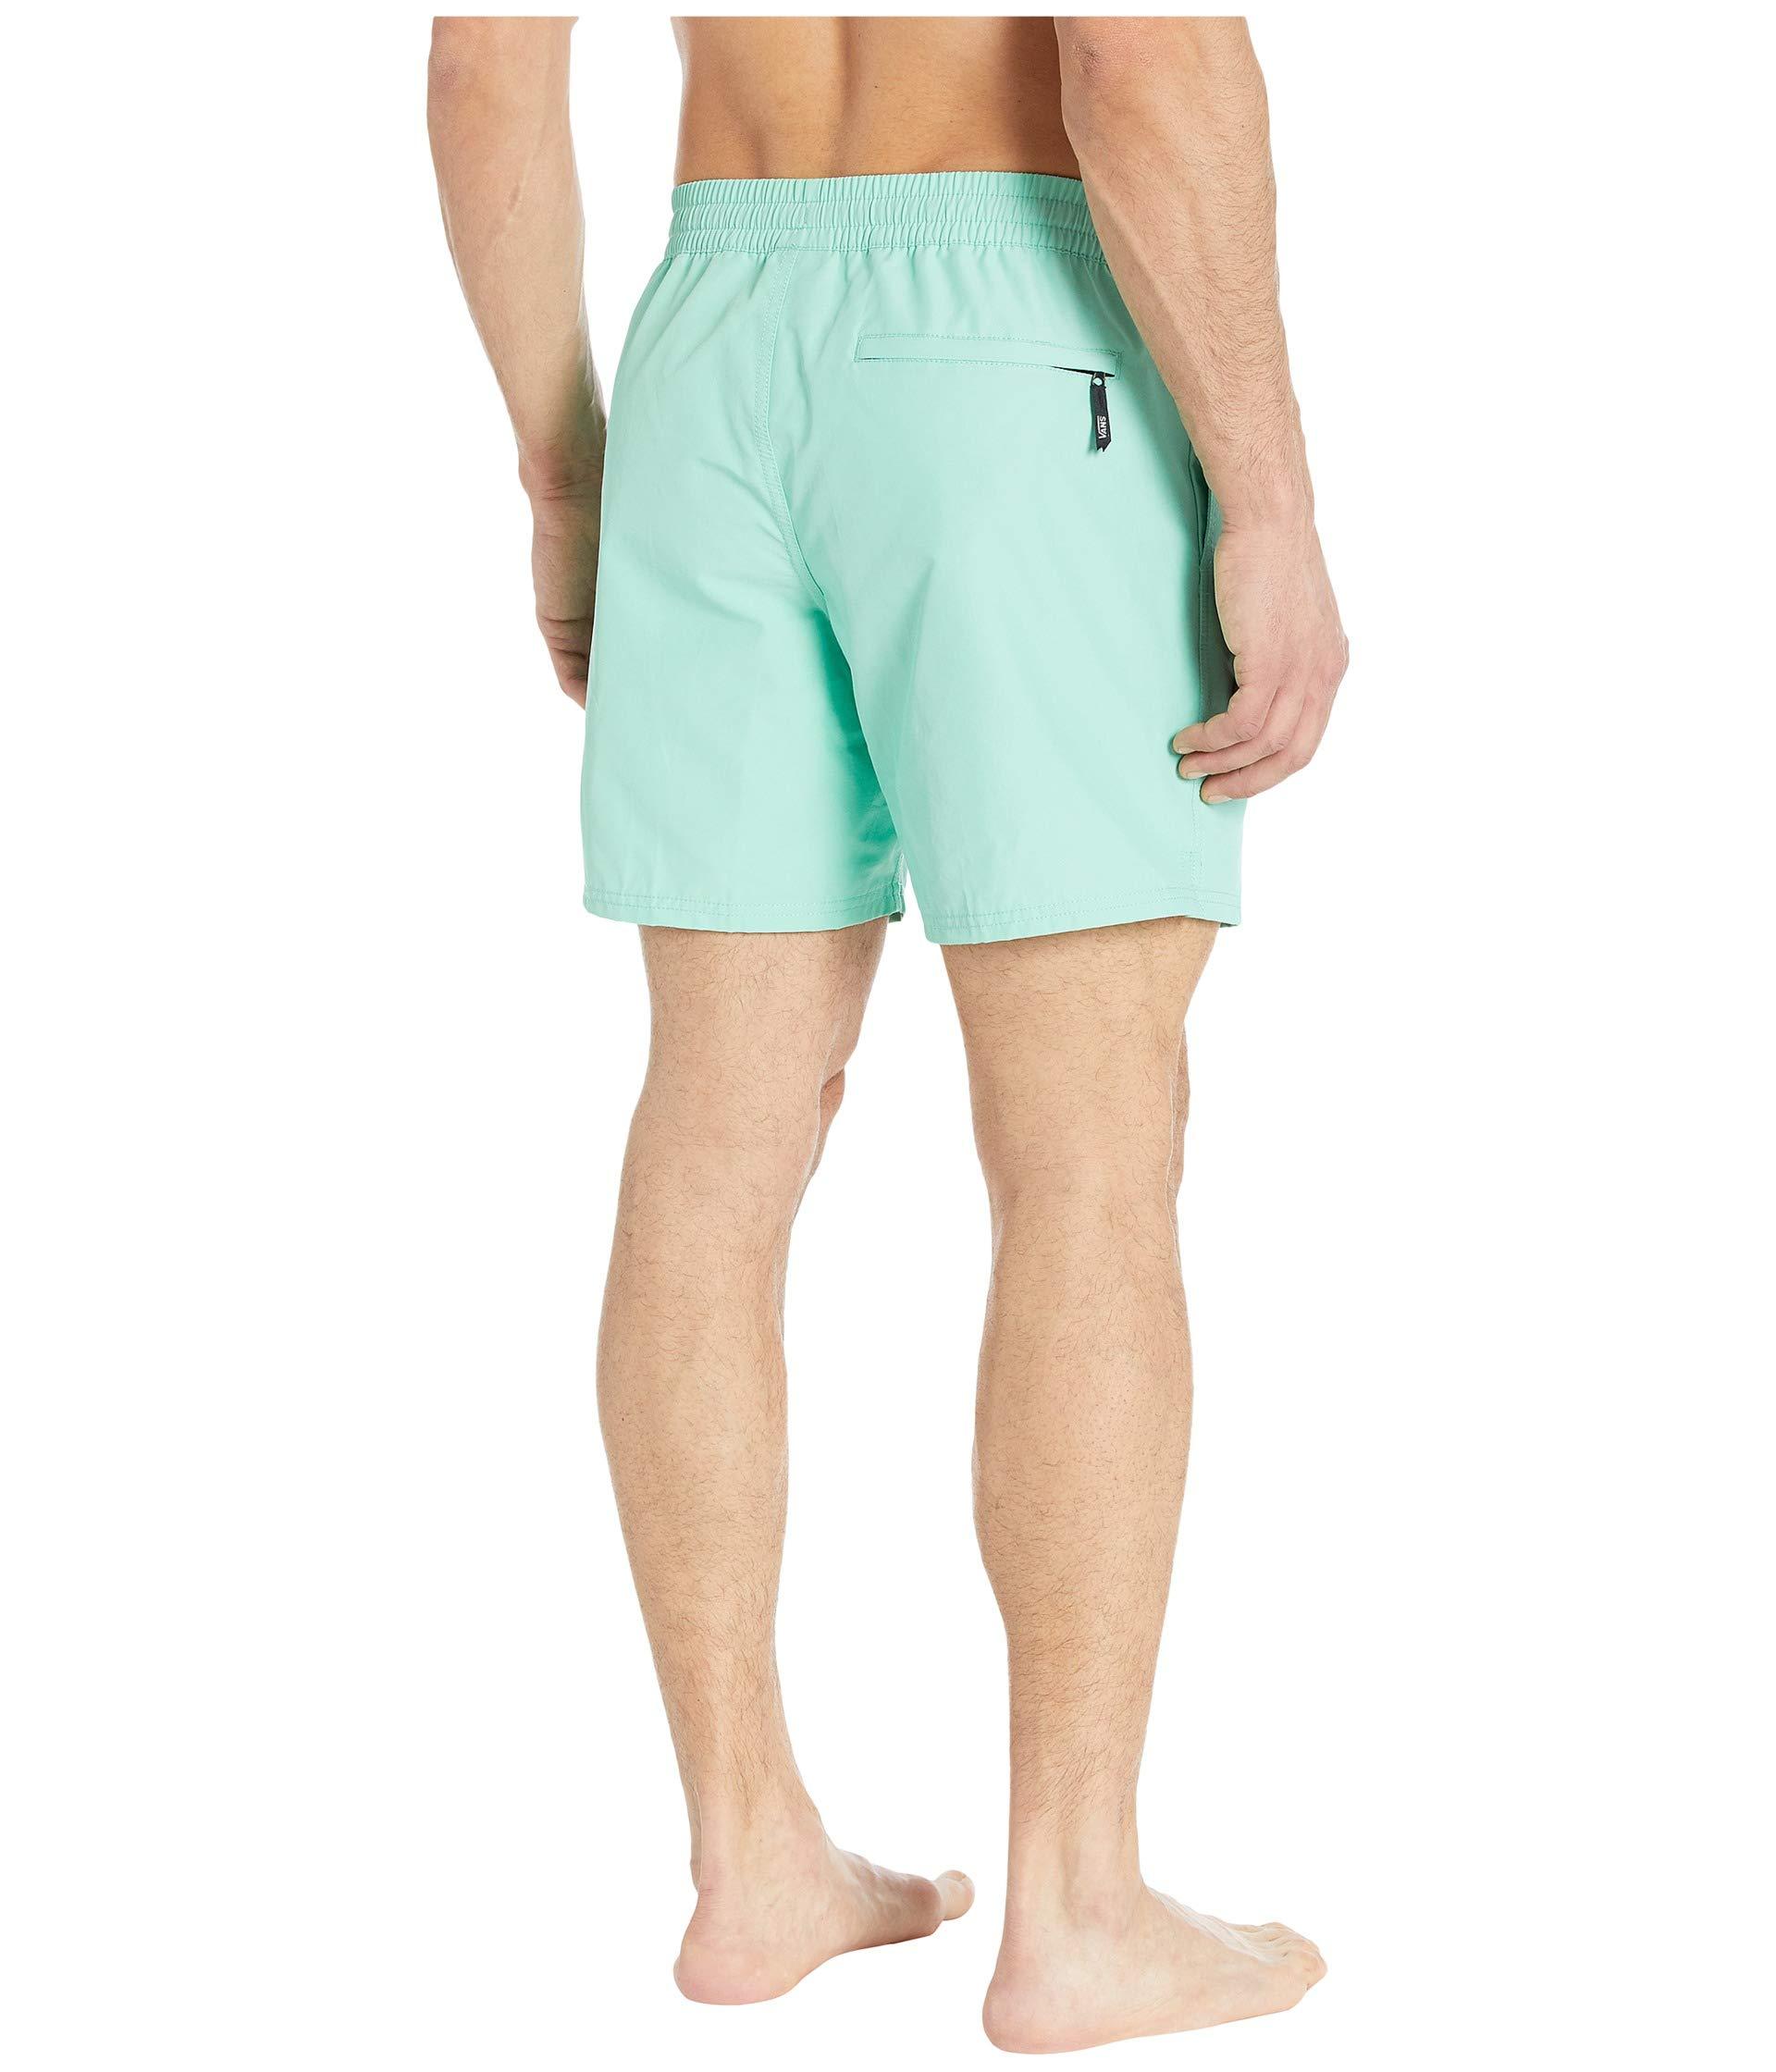 Vans Synthetic Primary Volley Ii Boardshorts in Blue for Men - Lyst